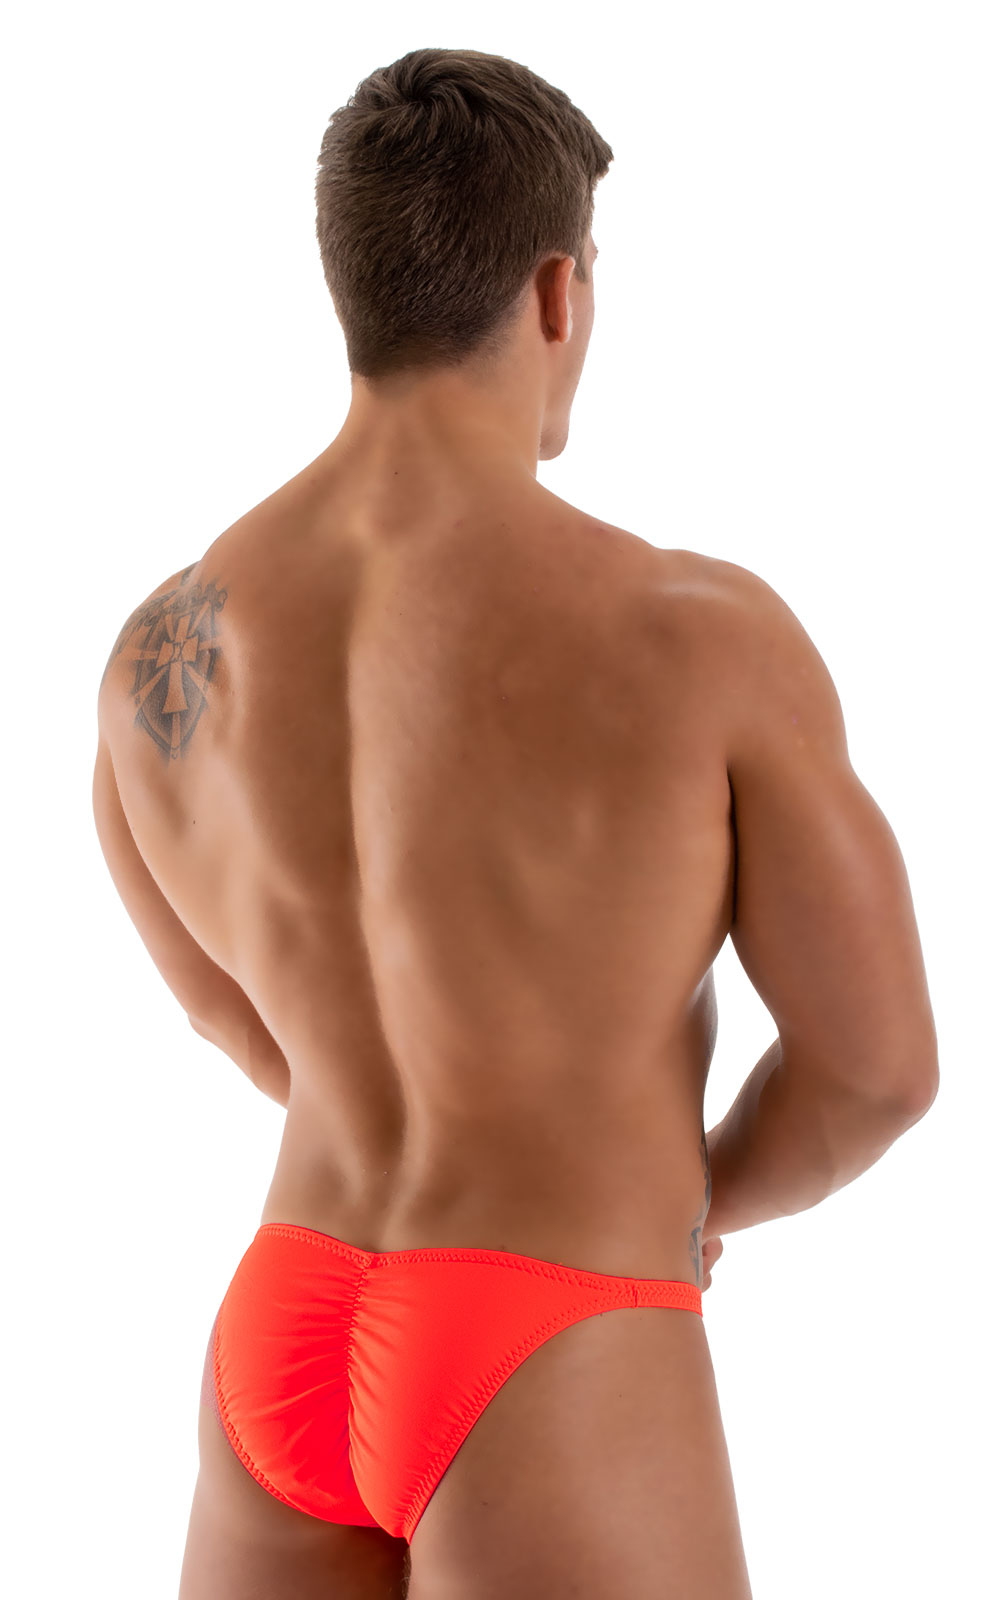 Fitted Pouch - Puckered Back - Posing Suit in Blazing Orange, Rear View